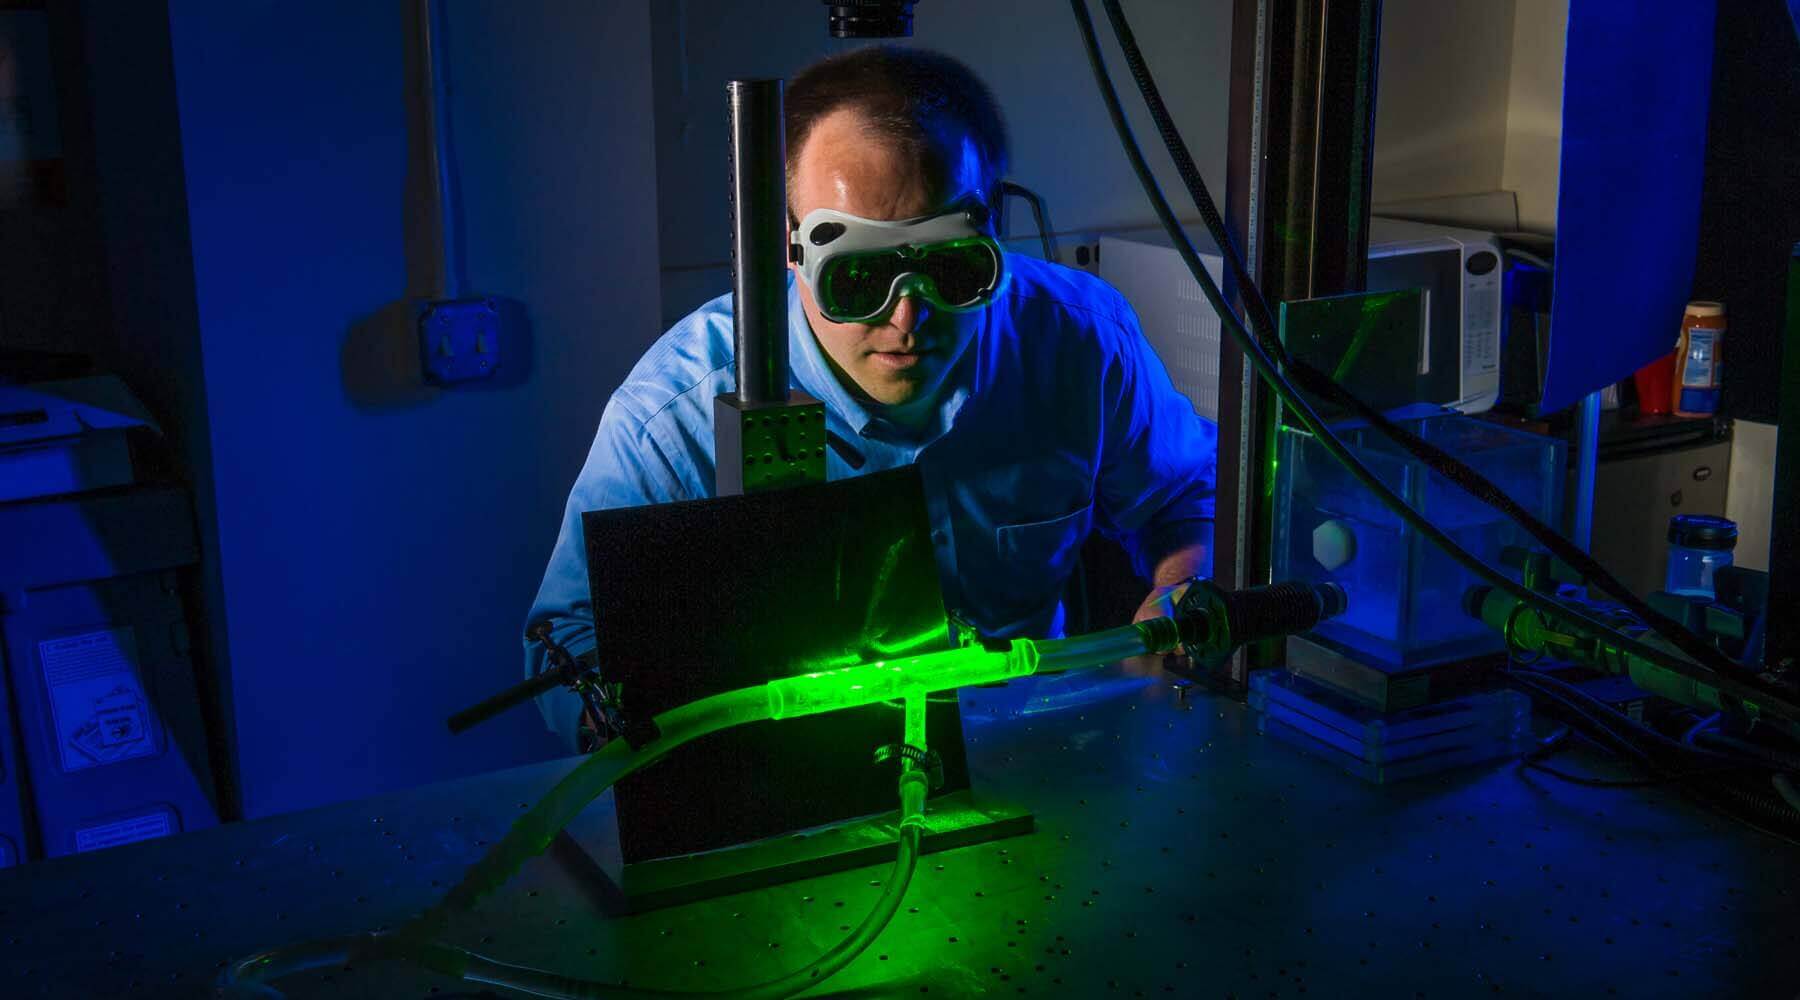 Researcher wearing goggles in lab